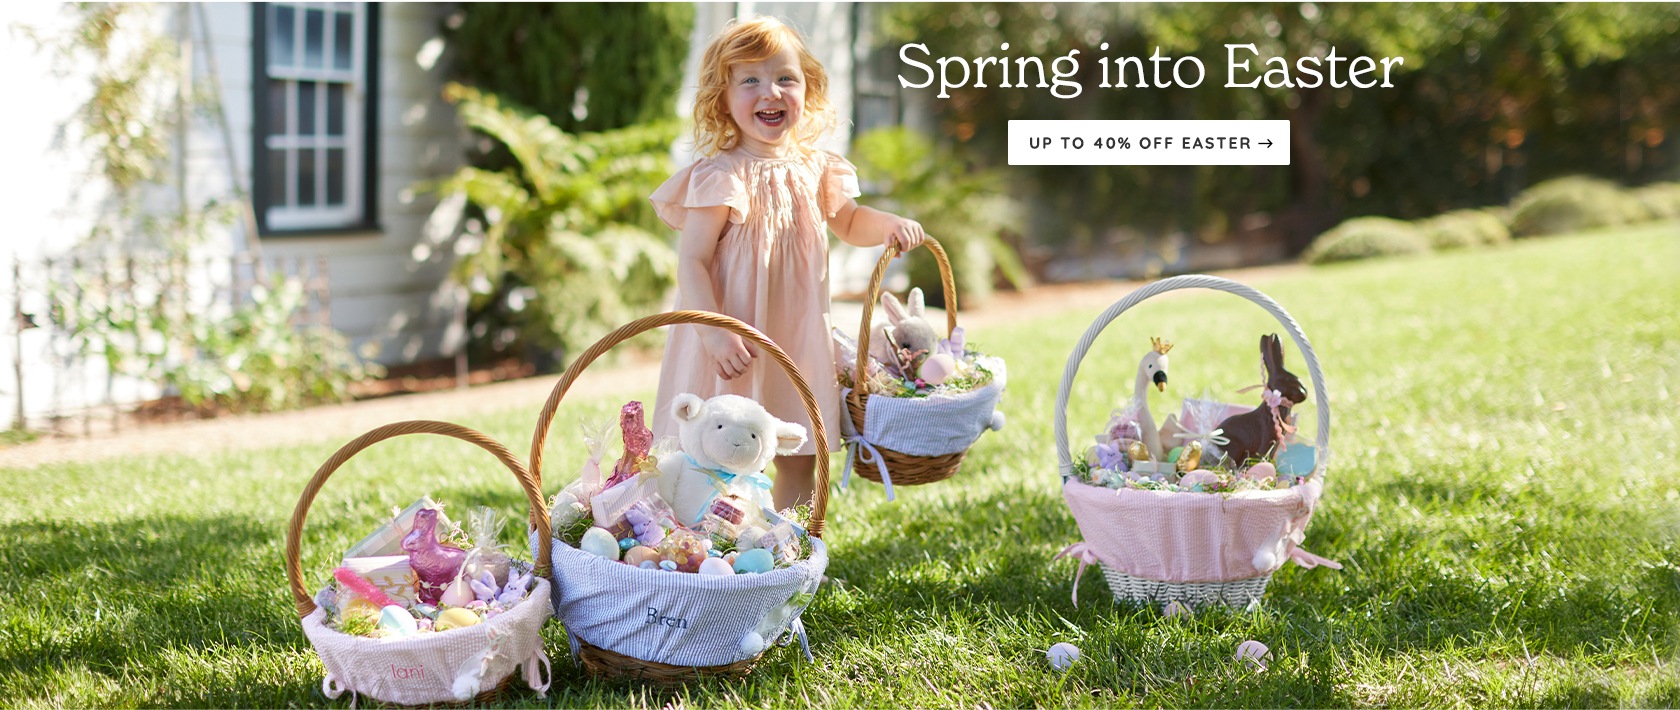 Up to 40% Off Easter >